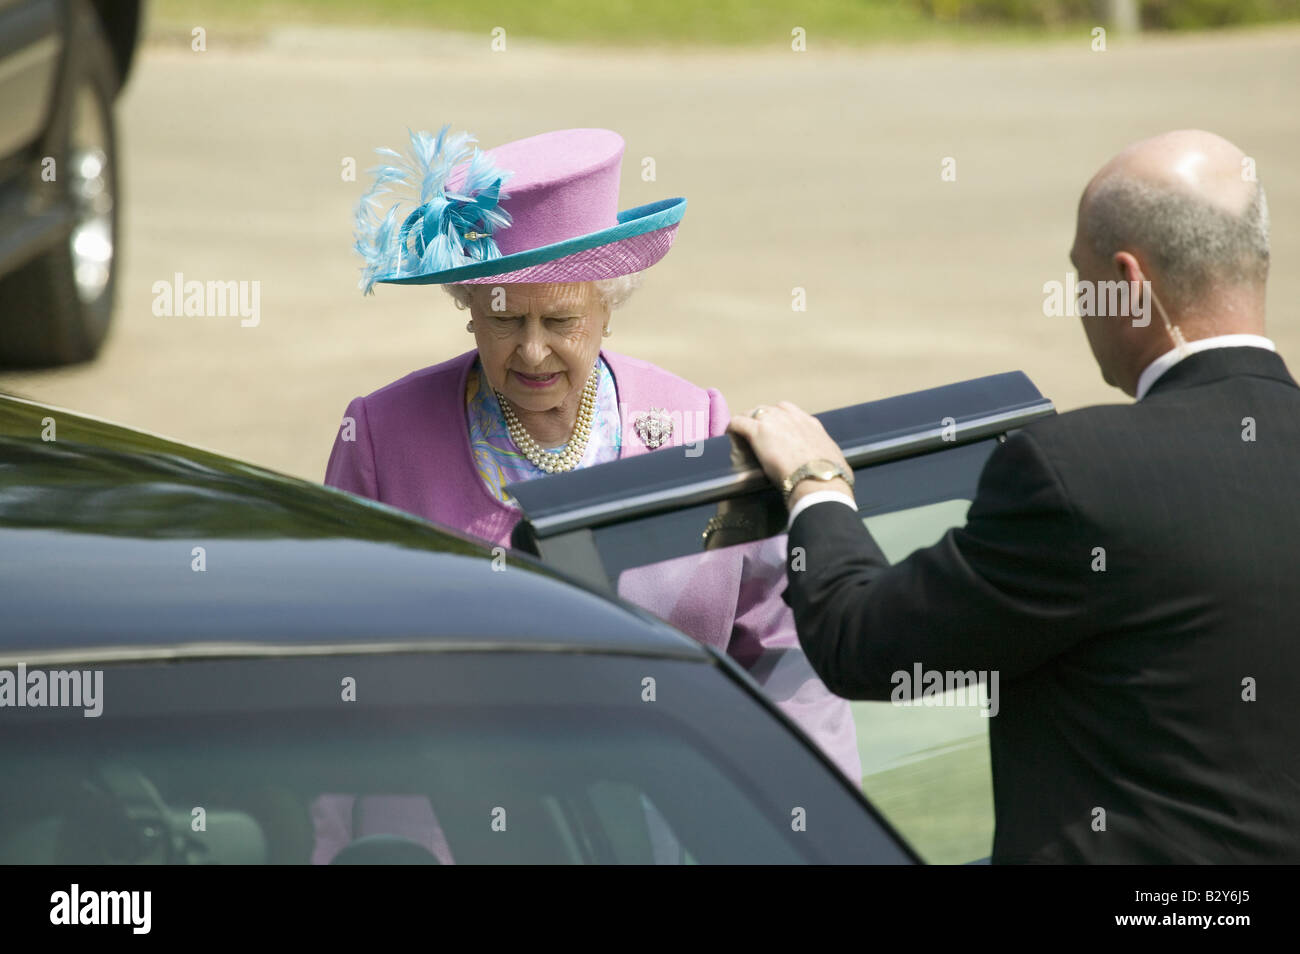 Queen Elizabeth II in bright purple outfit and hat, entering Presidential Limousine in Williamsburg VA Stock Photo